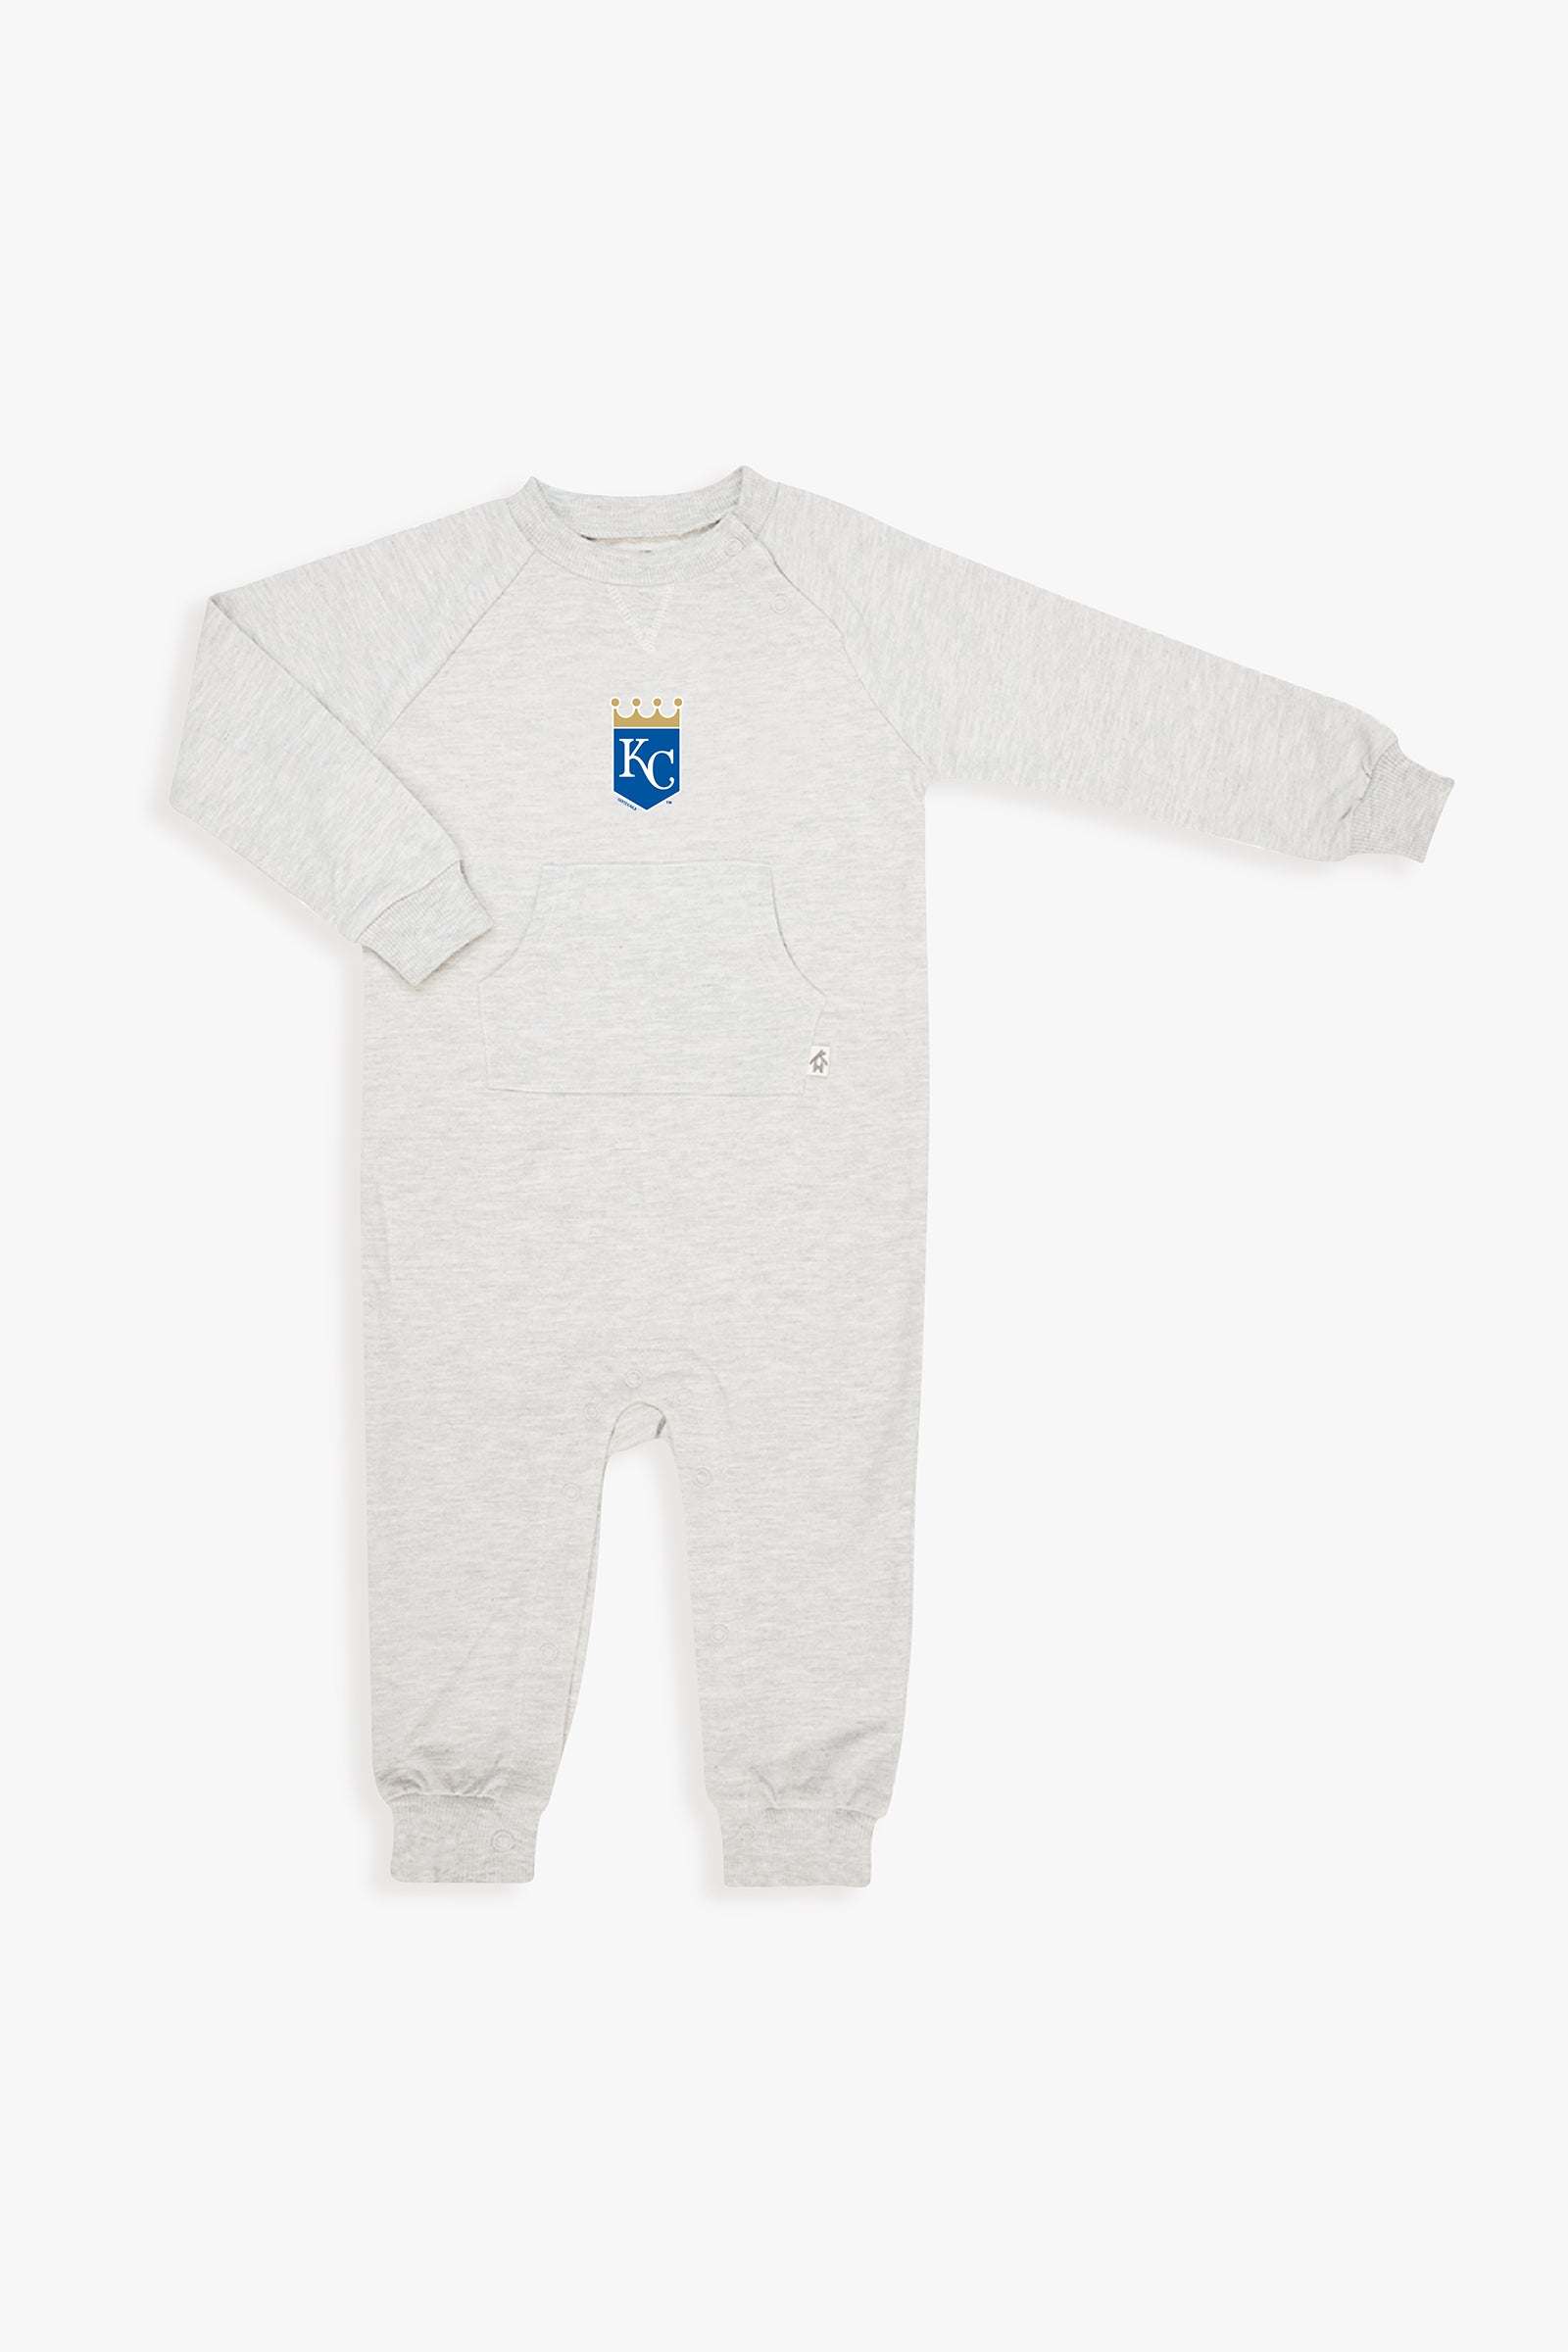 MLB Unisex Baby French Terry Onesie Jumpsuit